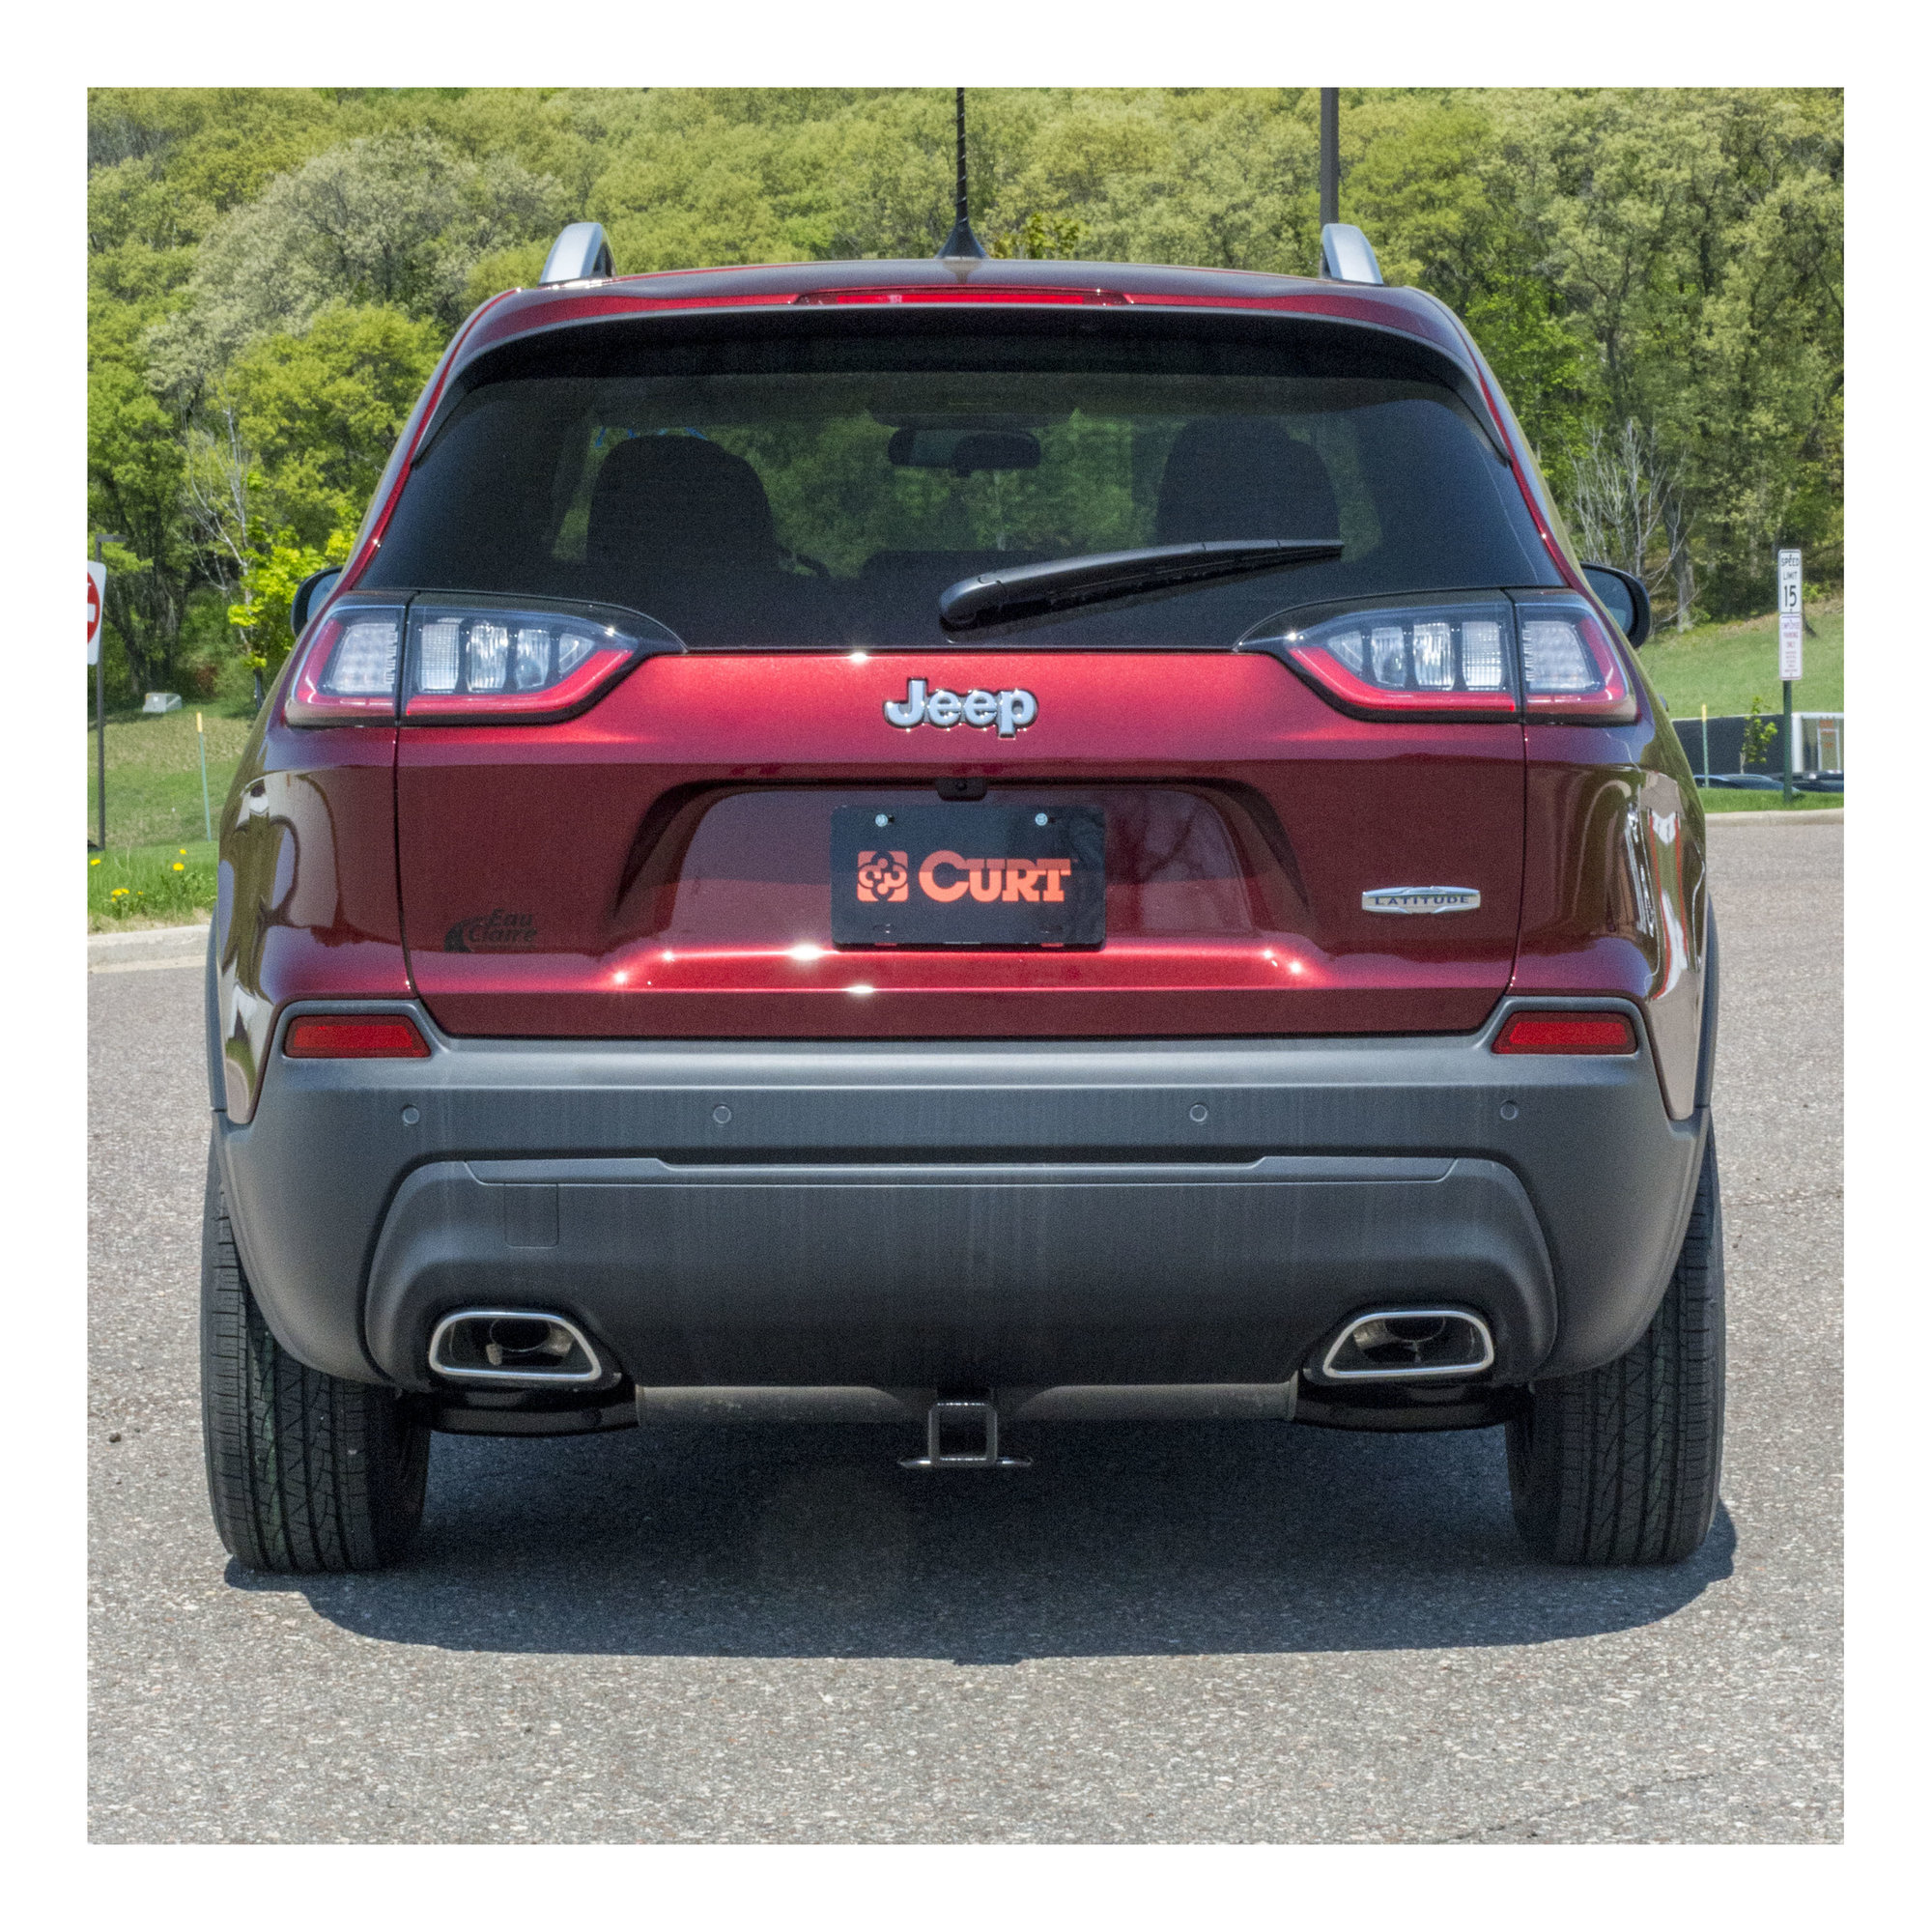 CURT Class III Trailer Hitch with 2" Receiver for 2019 Jeep Cherokee KL 2019 Jeep Cherokee Trailhawk Trailer Hitch